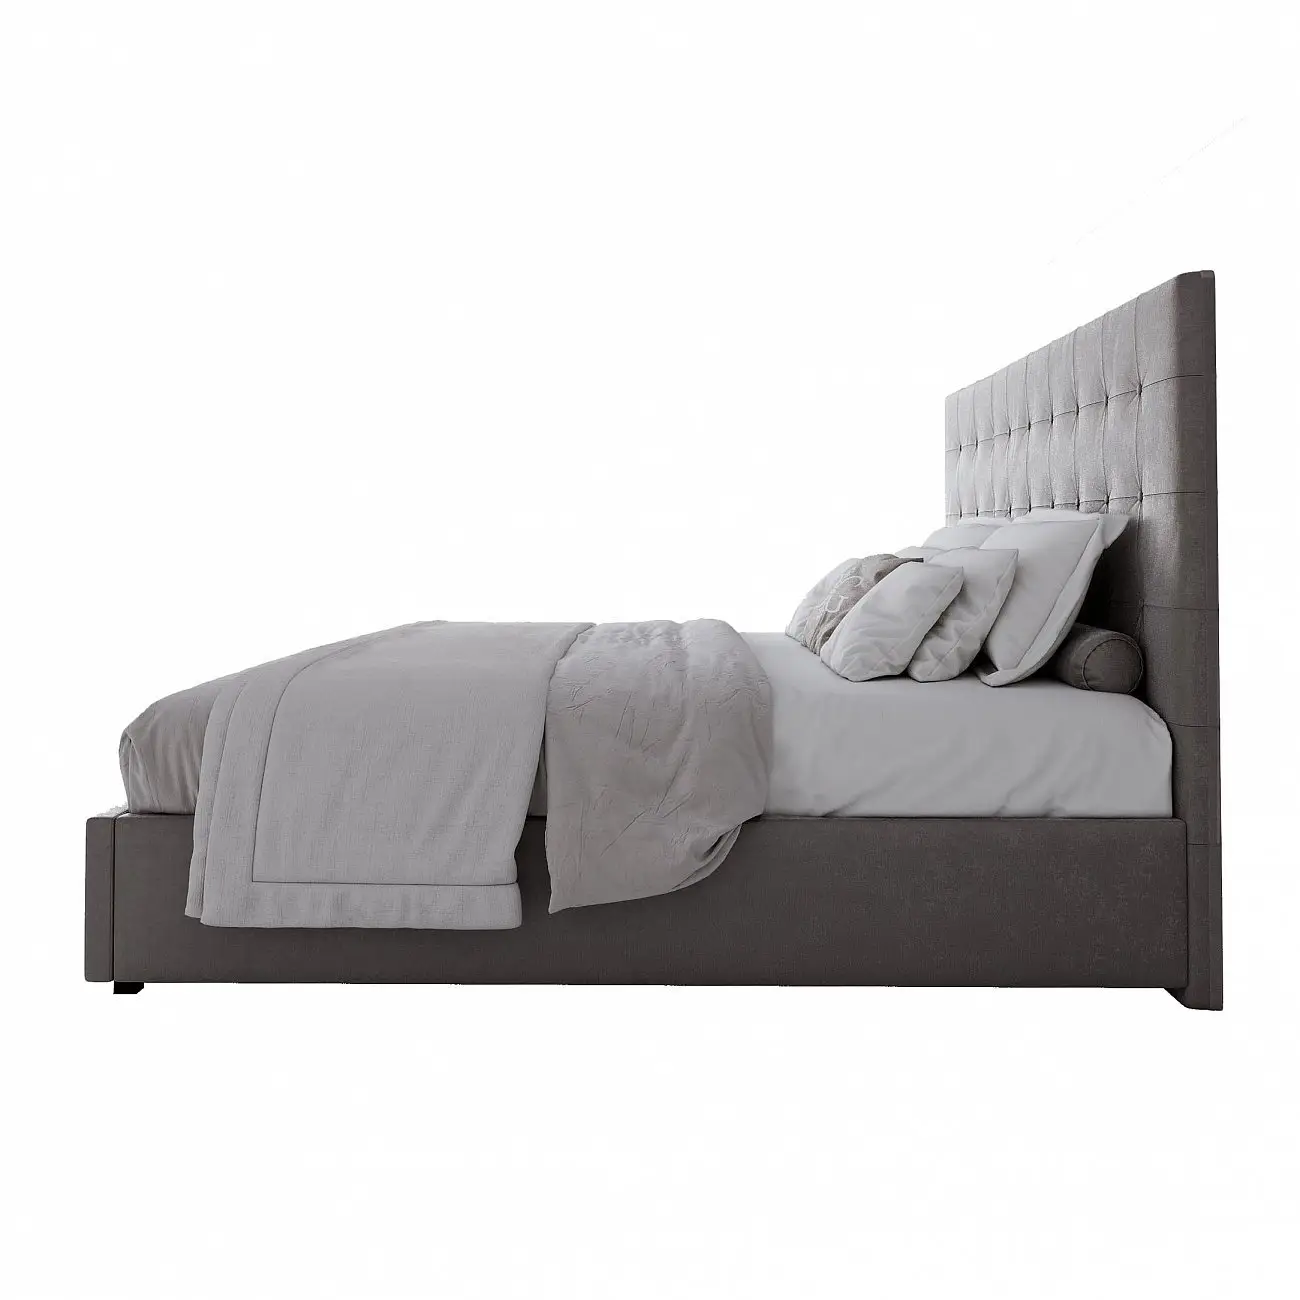 Royal Black Euro bed with upholstered headboard 200x200 cm light brown